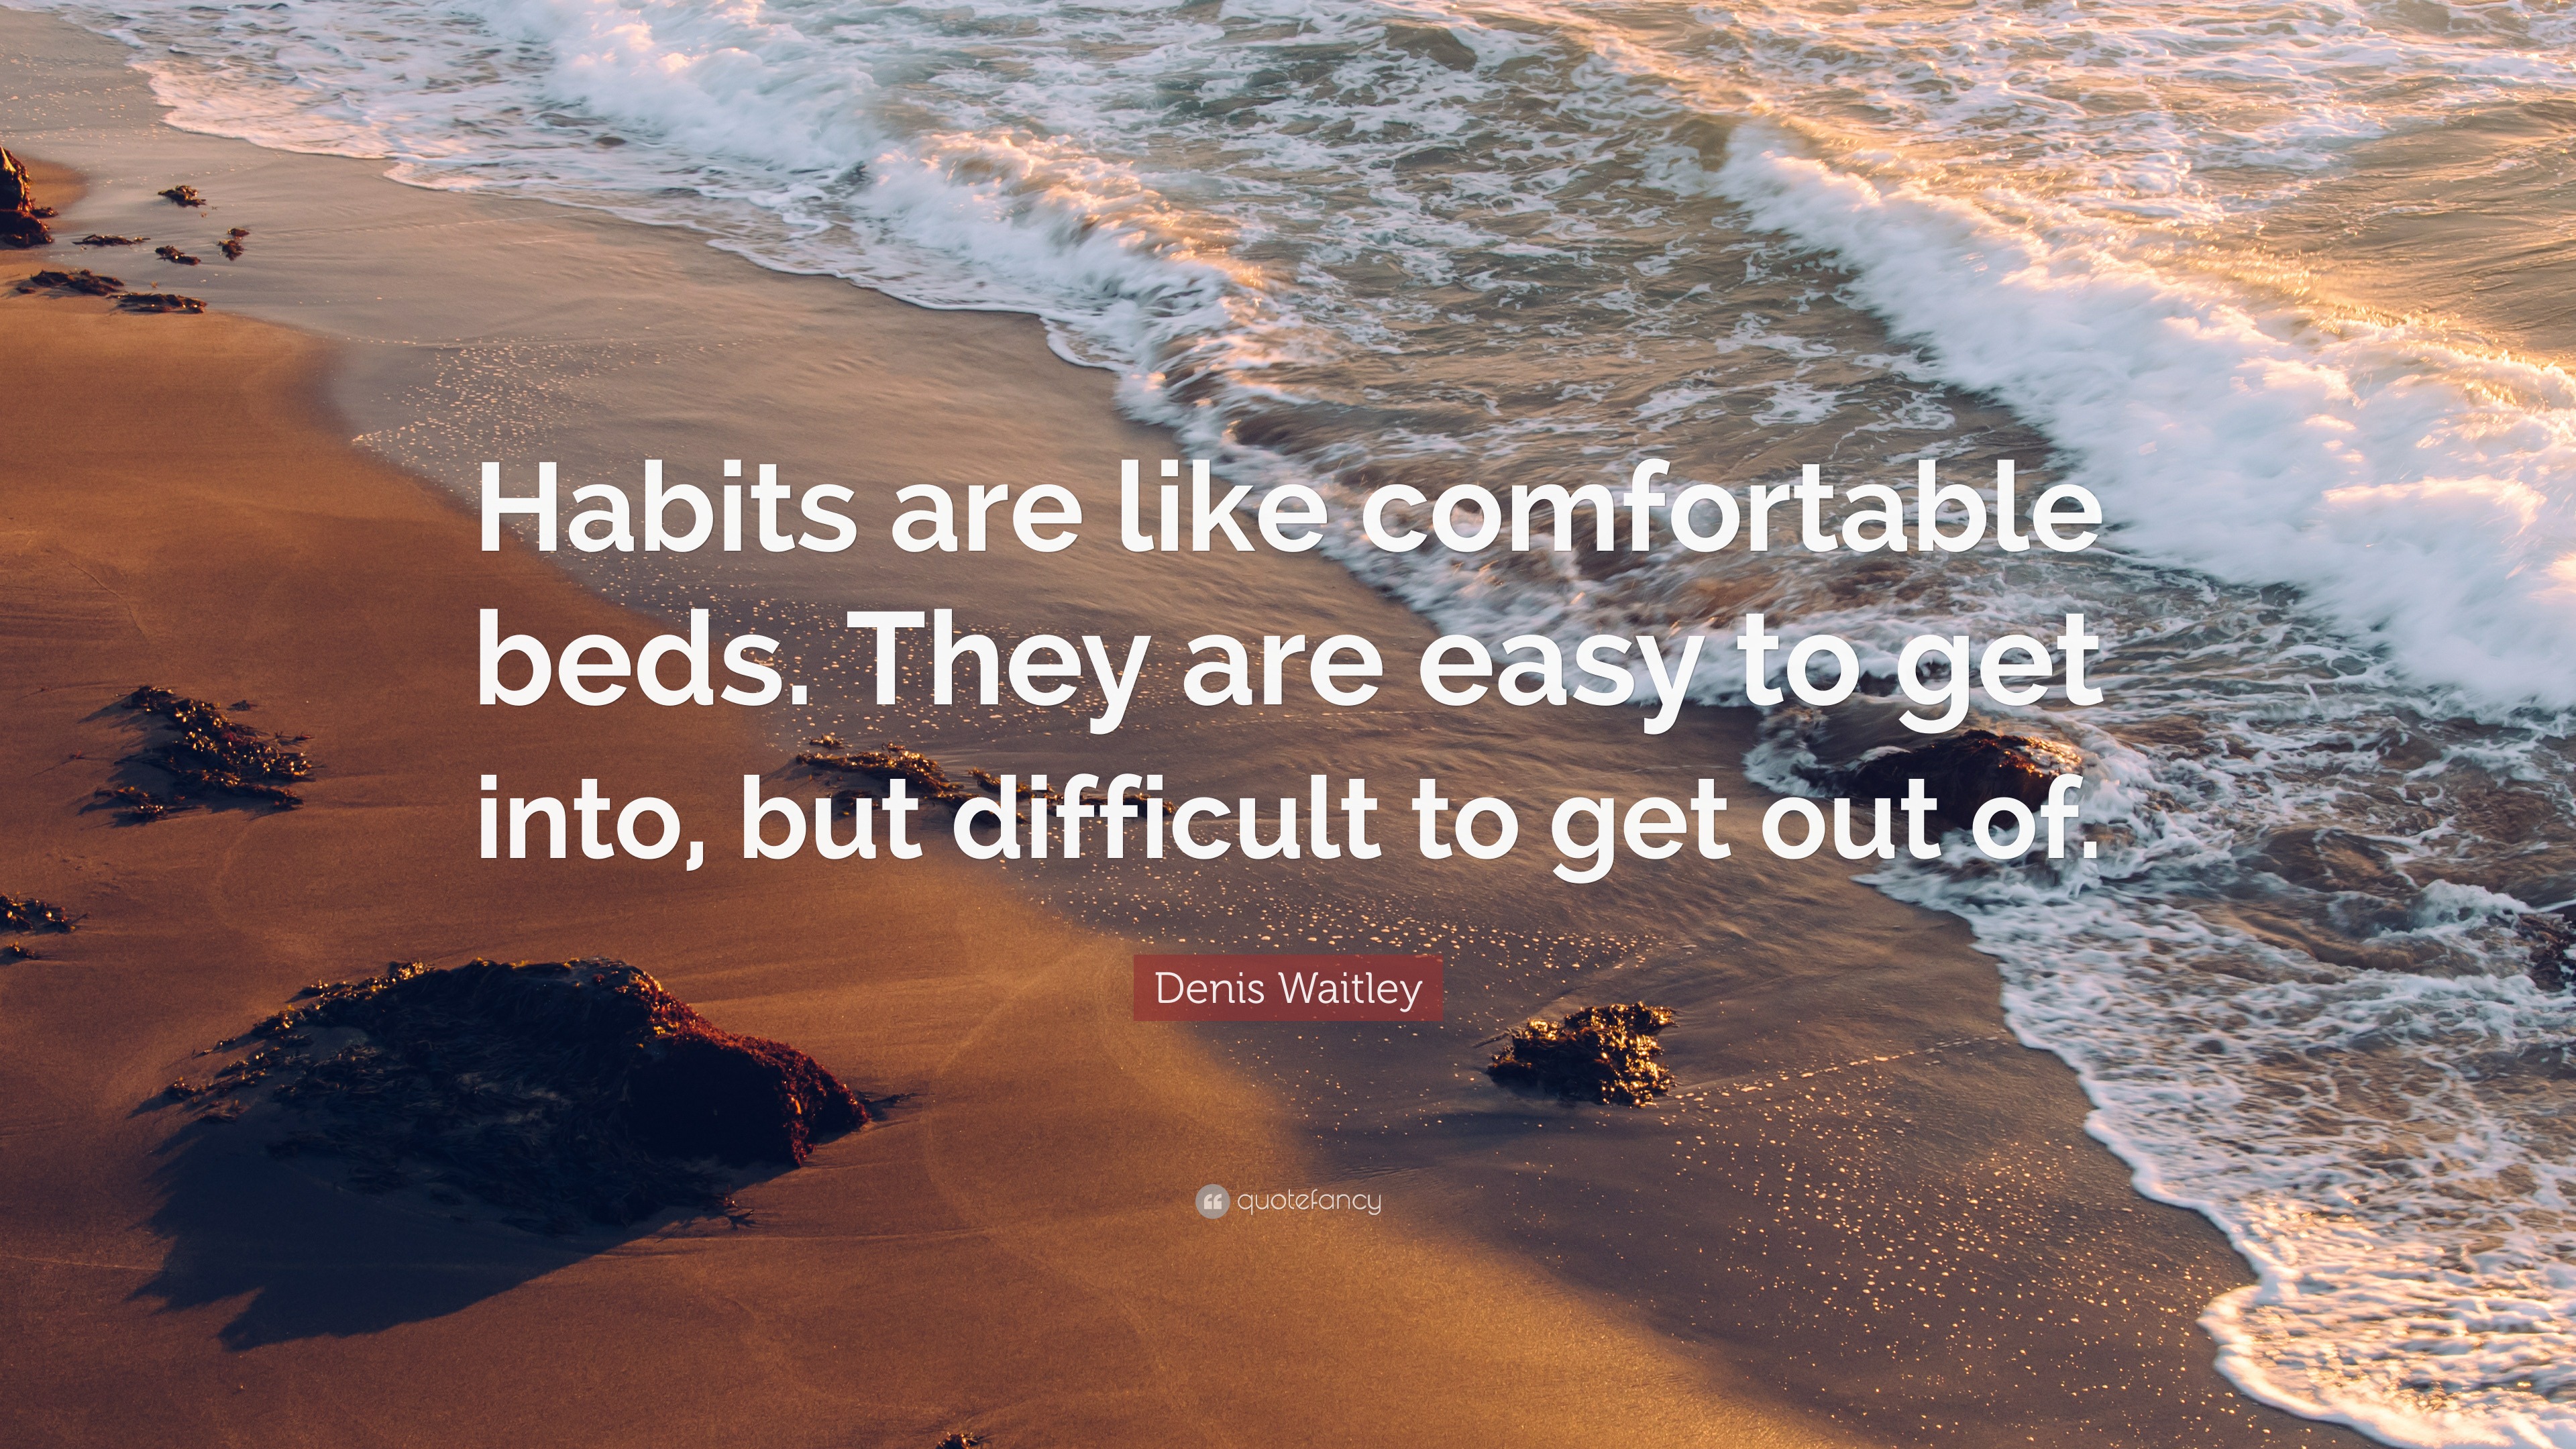 Denis Waitley Quote: “Habits are like comfortable beds. They are easy